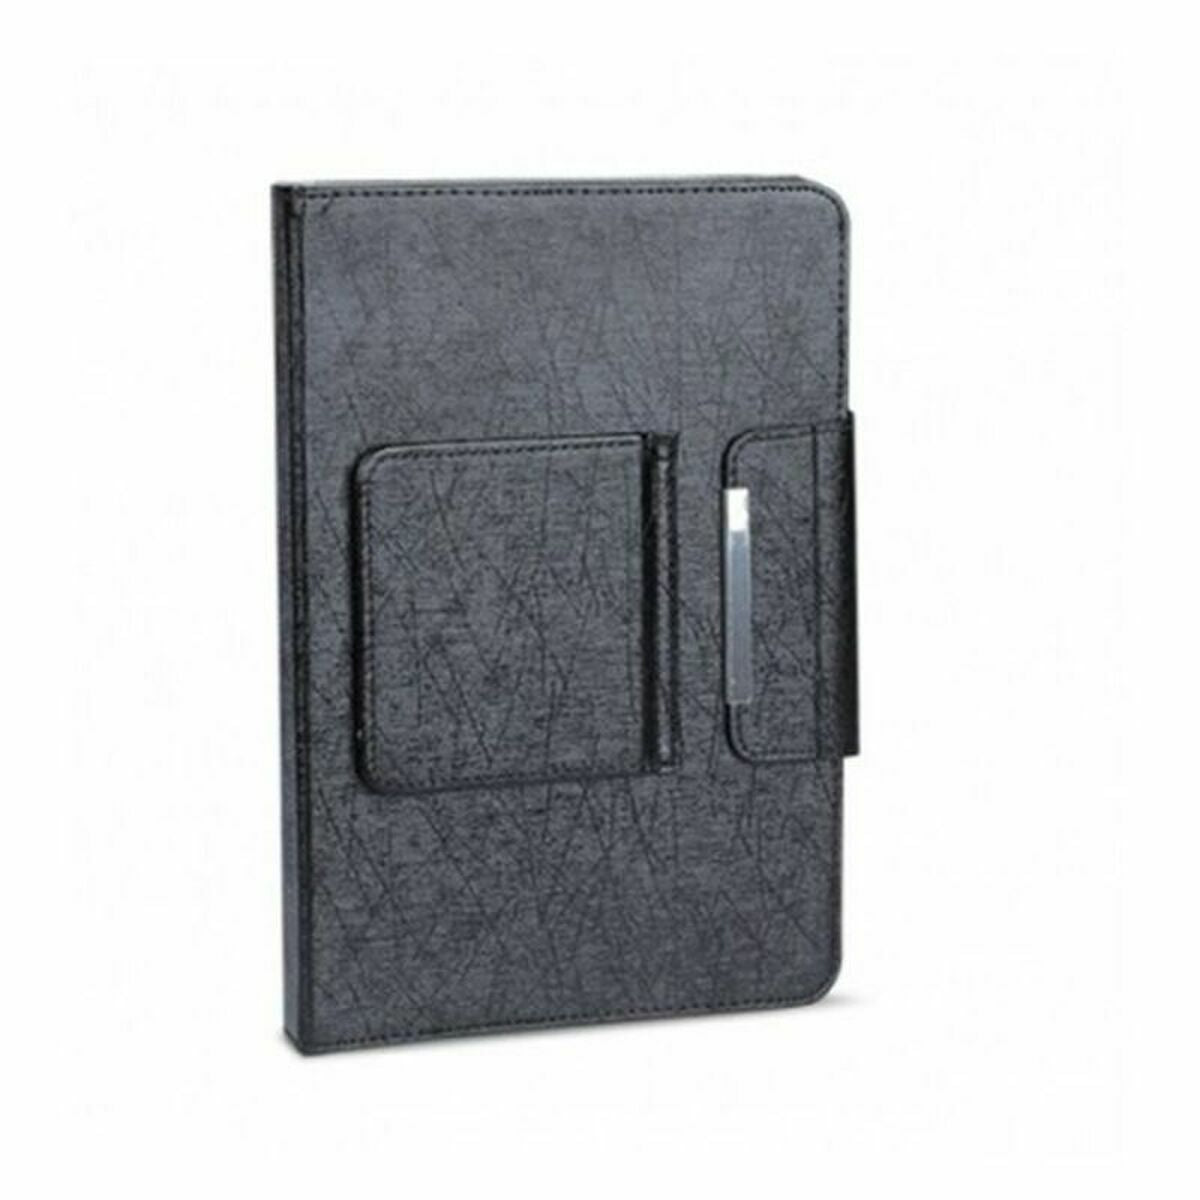 Case for Tablet and Keyboard 3GO CSGT28 10"